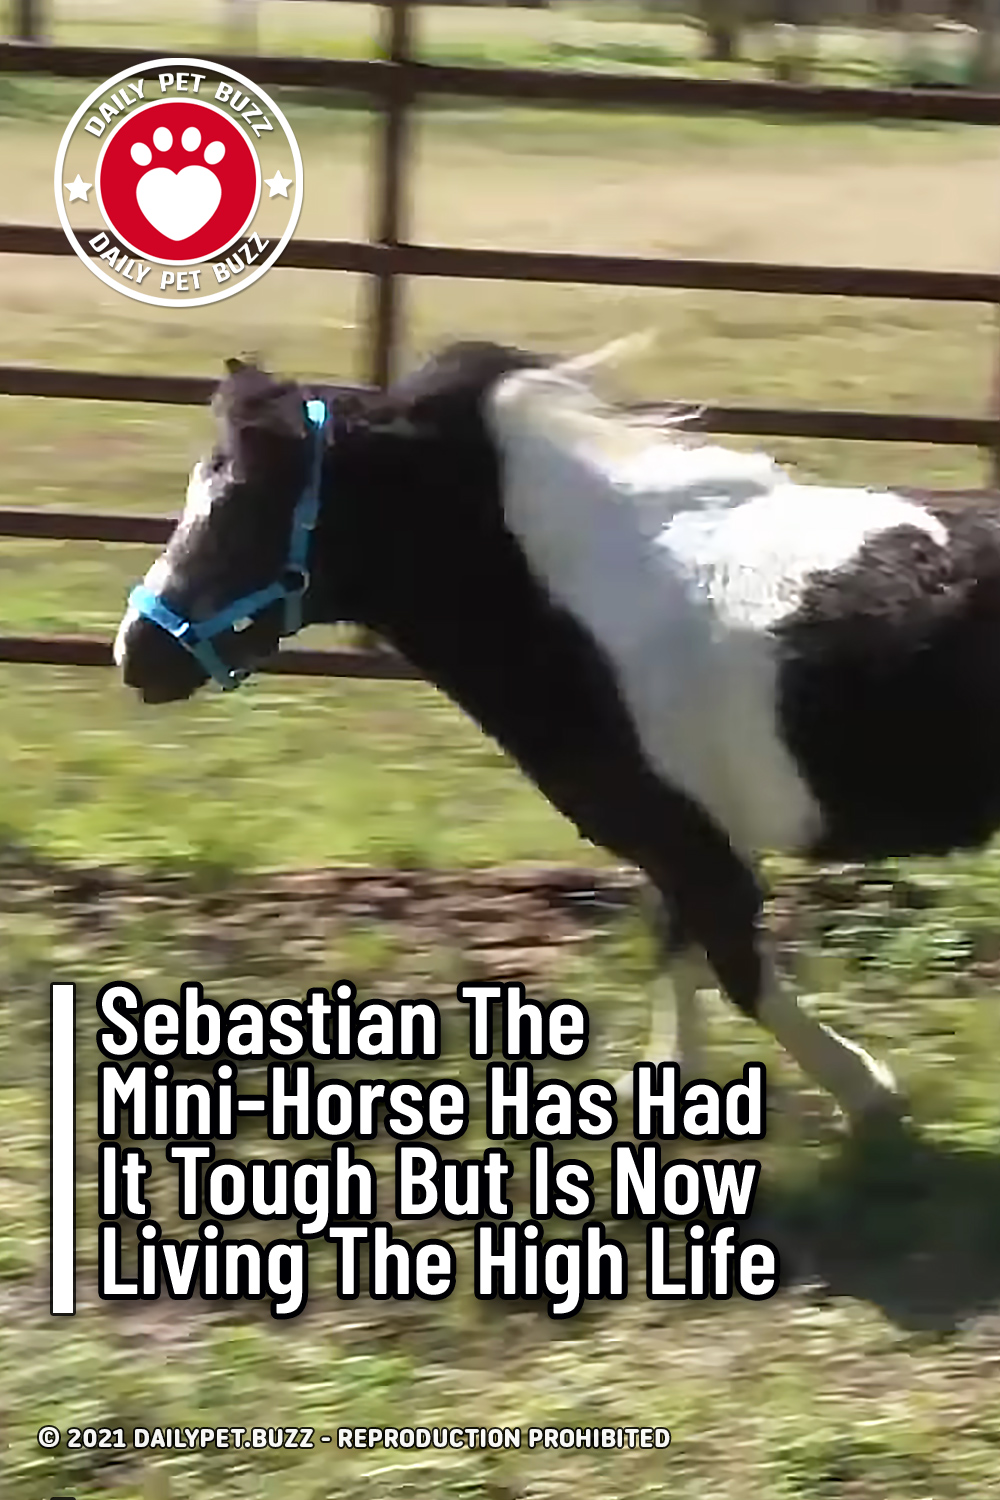 Sebastian The Mini-Horse Has Had It Tough But Is Now Living The High Life